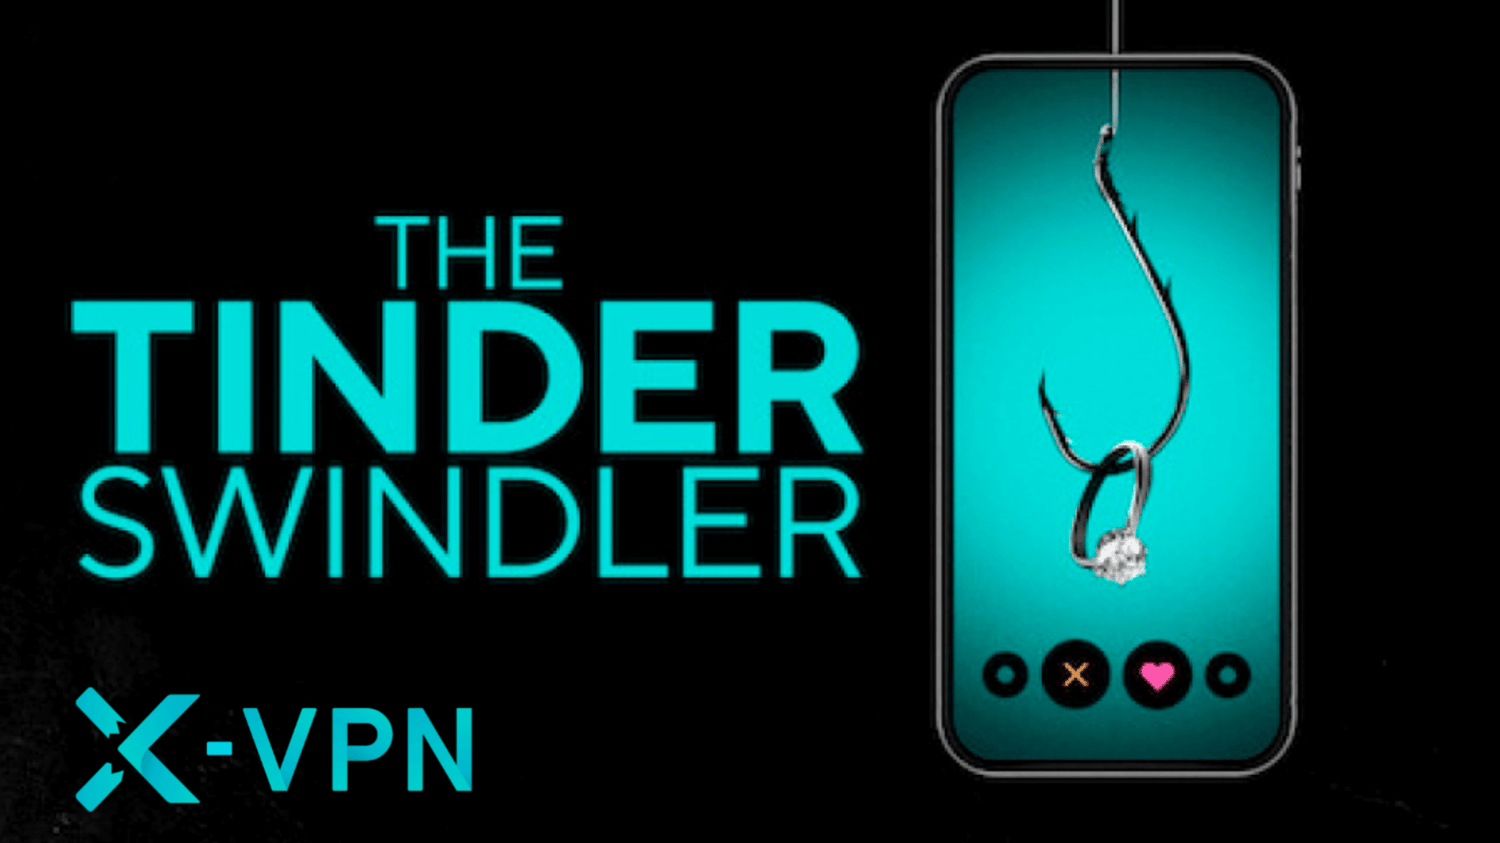 The Tinder Swindler on Netflix: a story about the romance scam